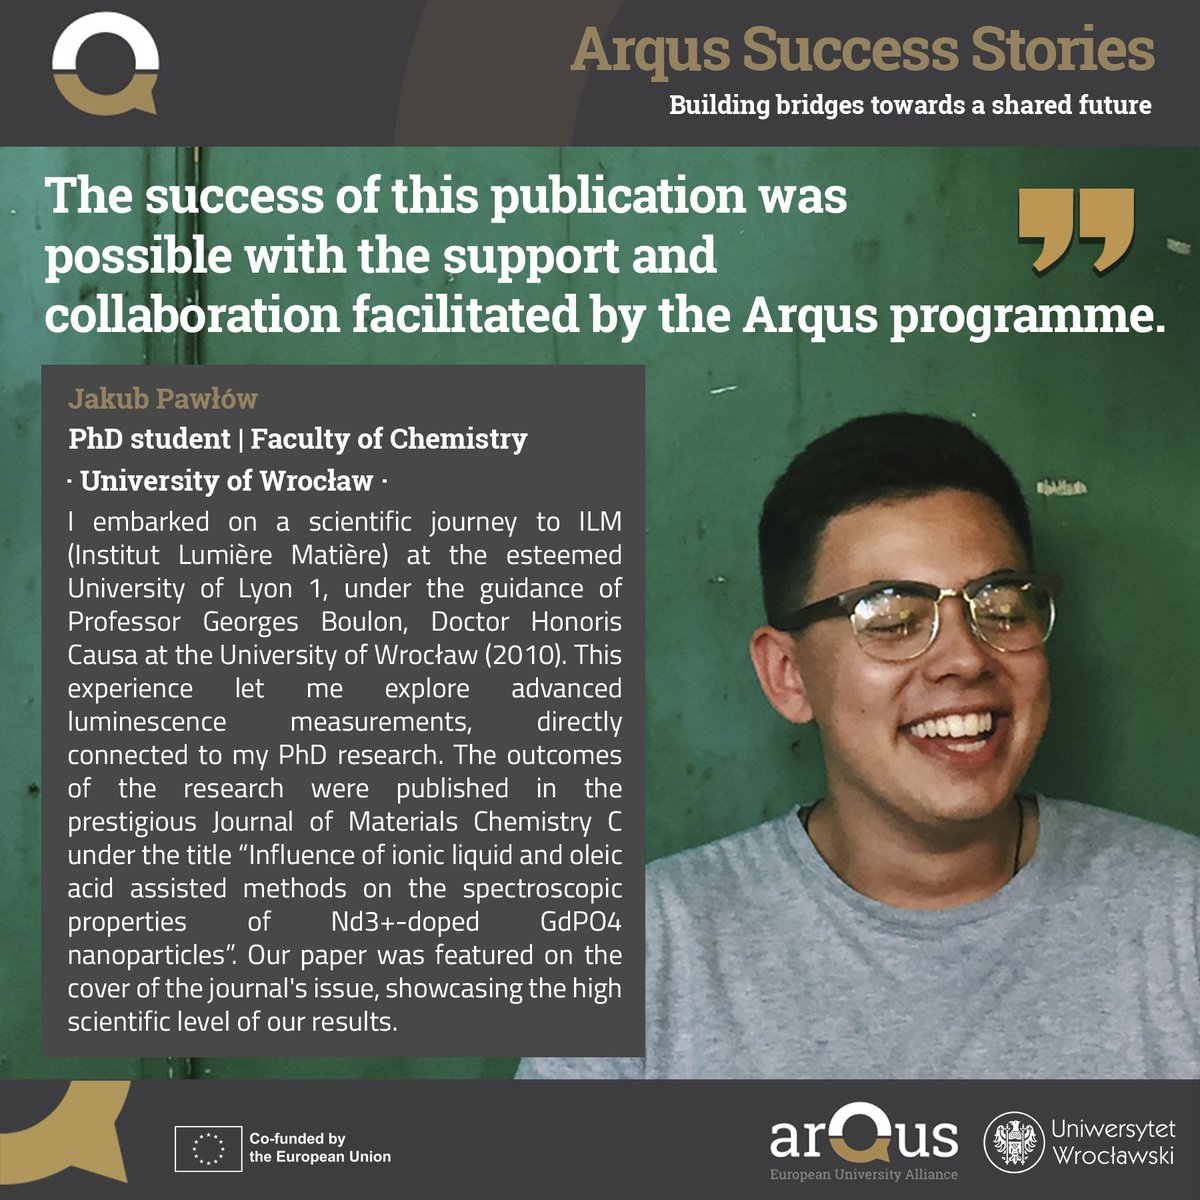 😃#Arqus offers young researchers great opportunities for academic growth by facilitating #InternationalMobilityProgrammes that expand their global scientific networks🔬 👉Check out the #ArqusSuccessStory of Jakub Pawłów (@uniwroc)👨‍🎓👏